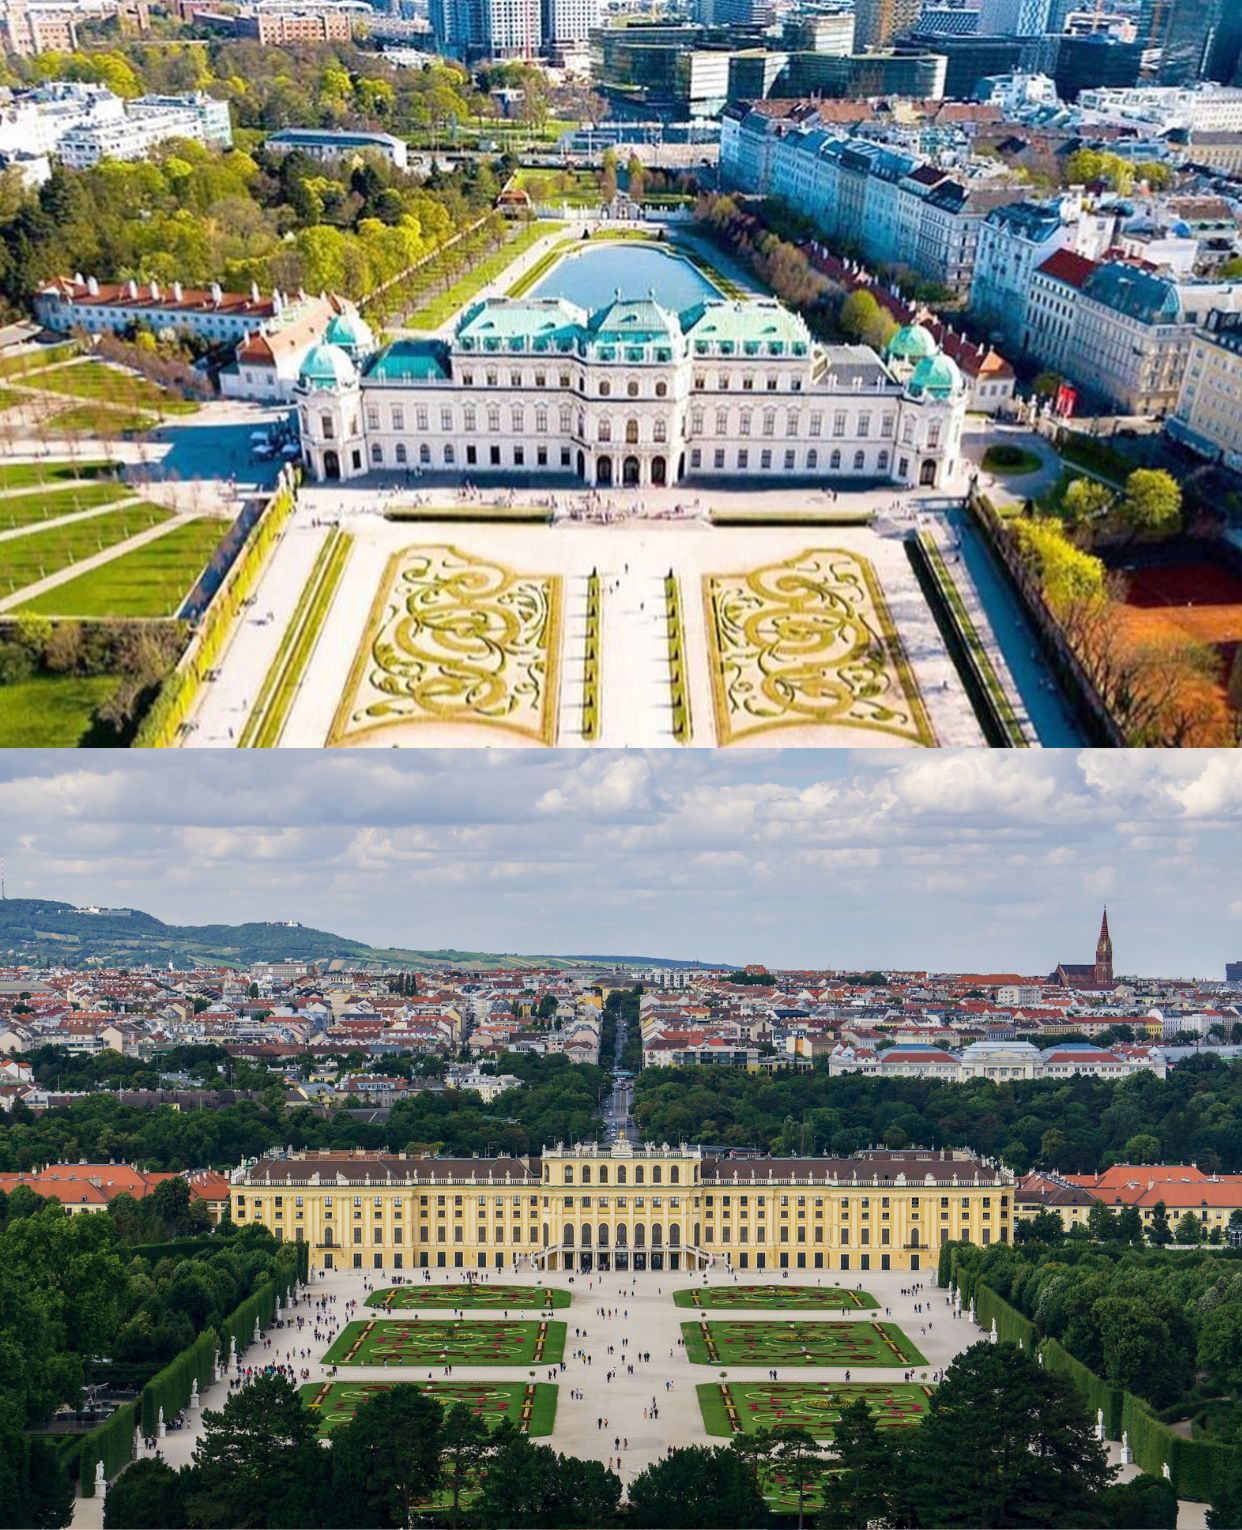 Schönbrunn Palace vs Belvedere Palace ! Which of these two palaces are most worth visiting